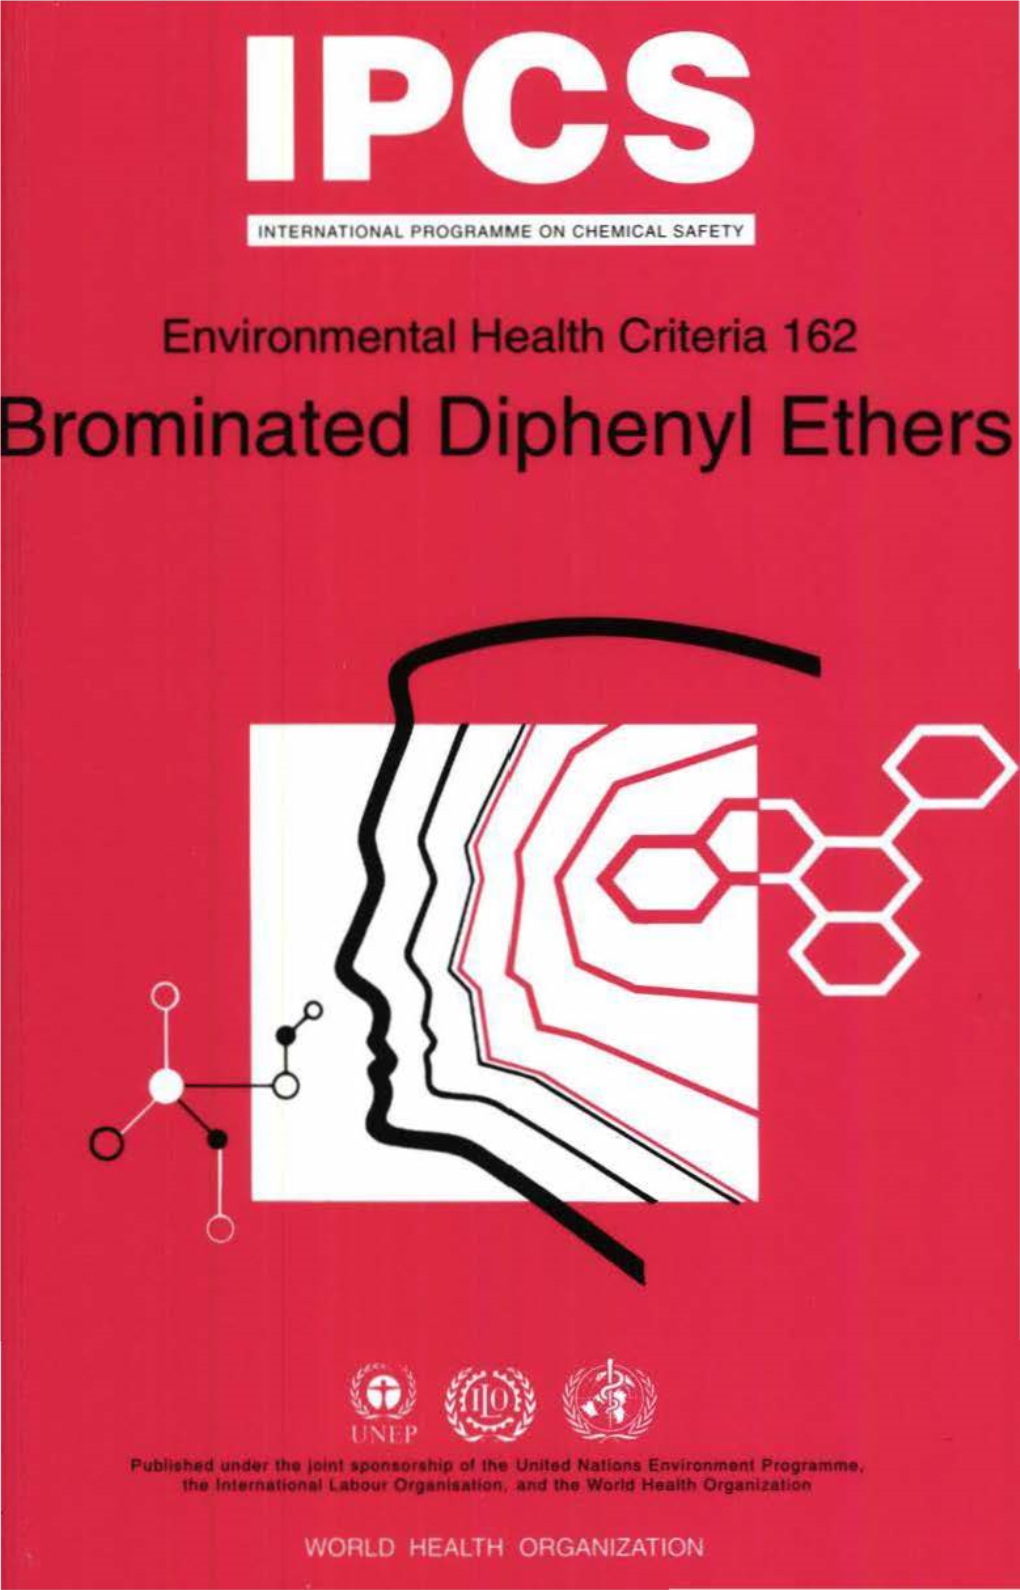 Brominated Diphenyl Ethers